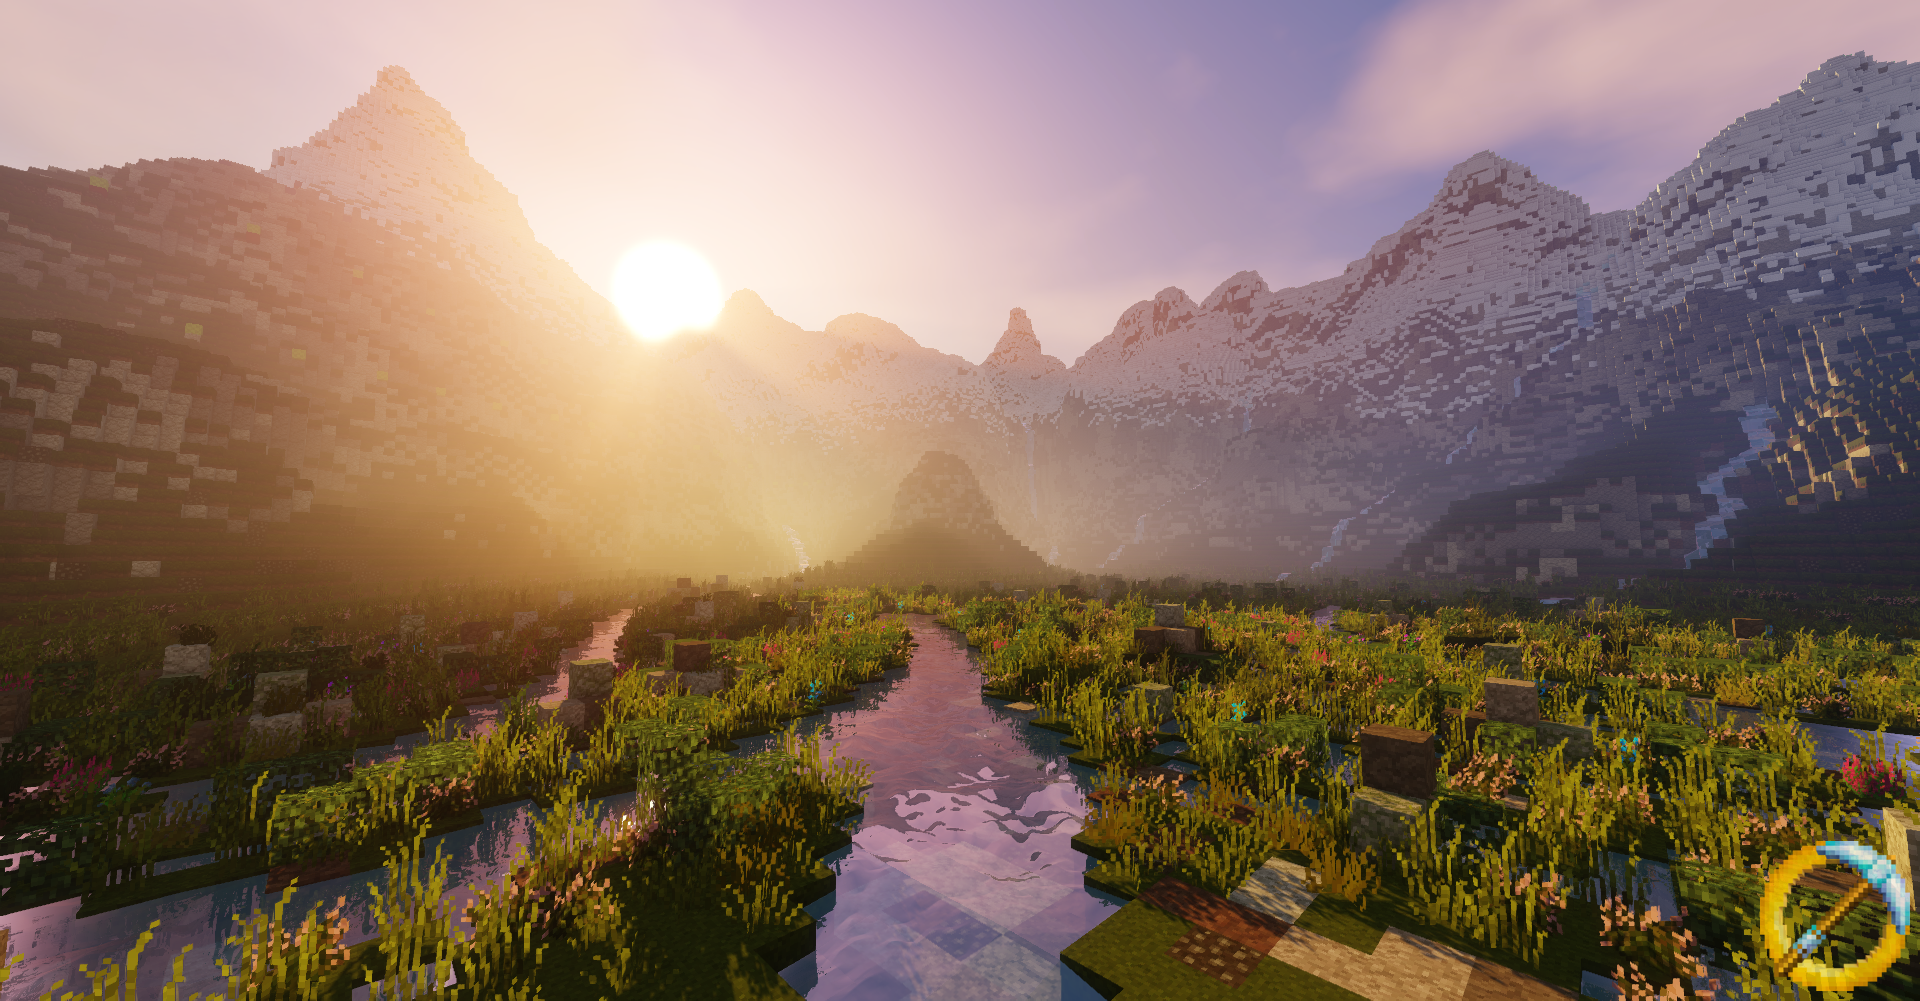 The sun rising above the mointains outside rivendell